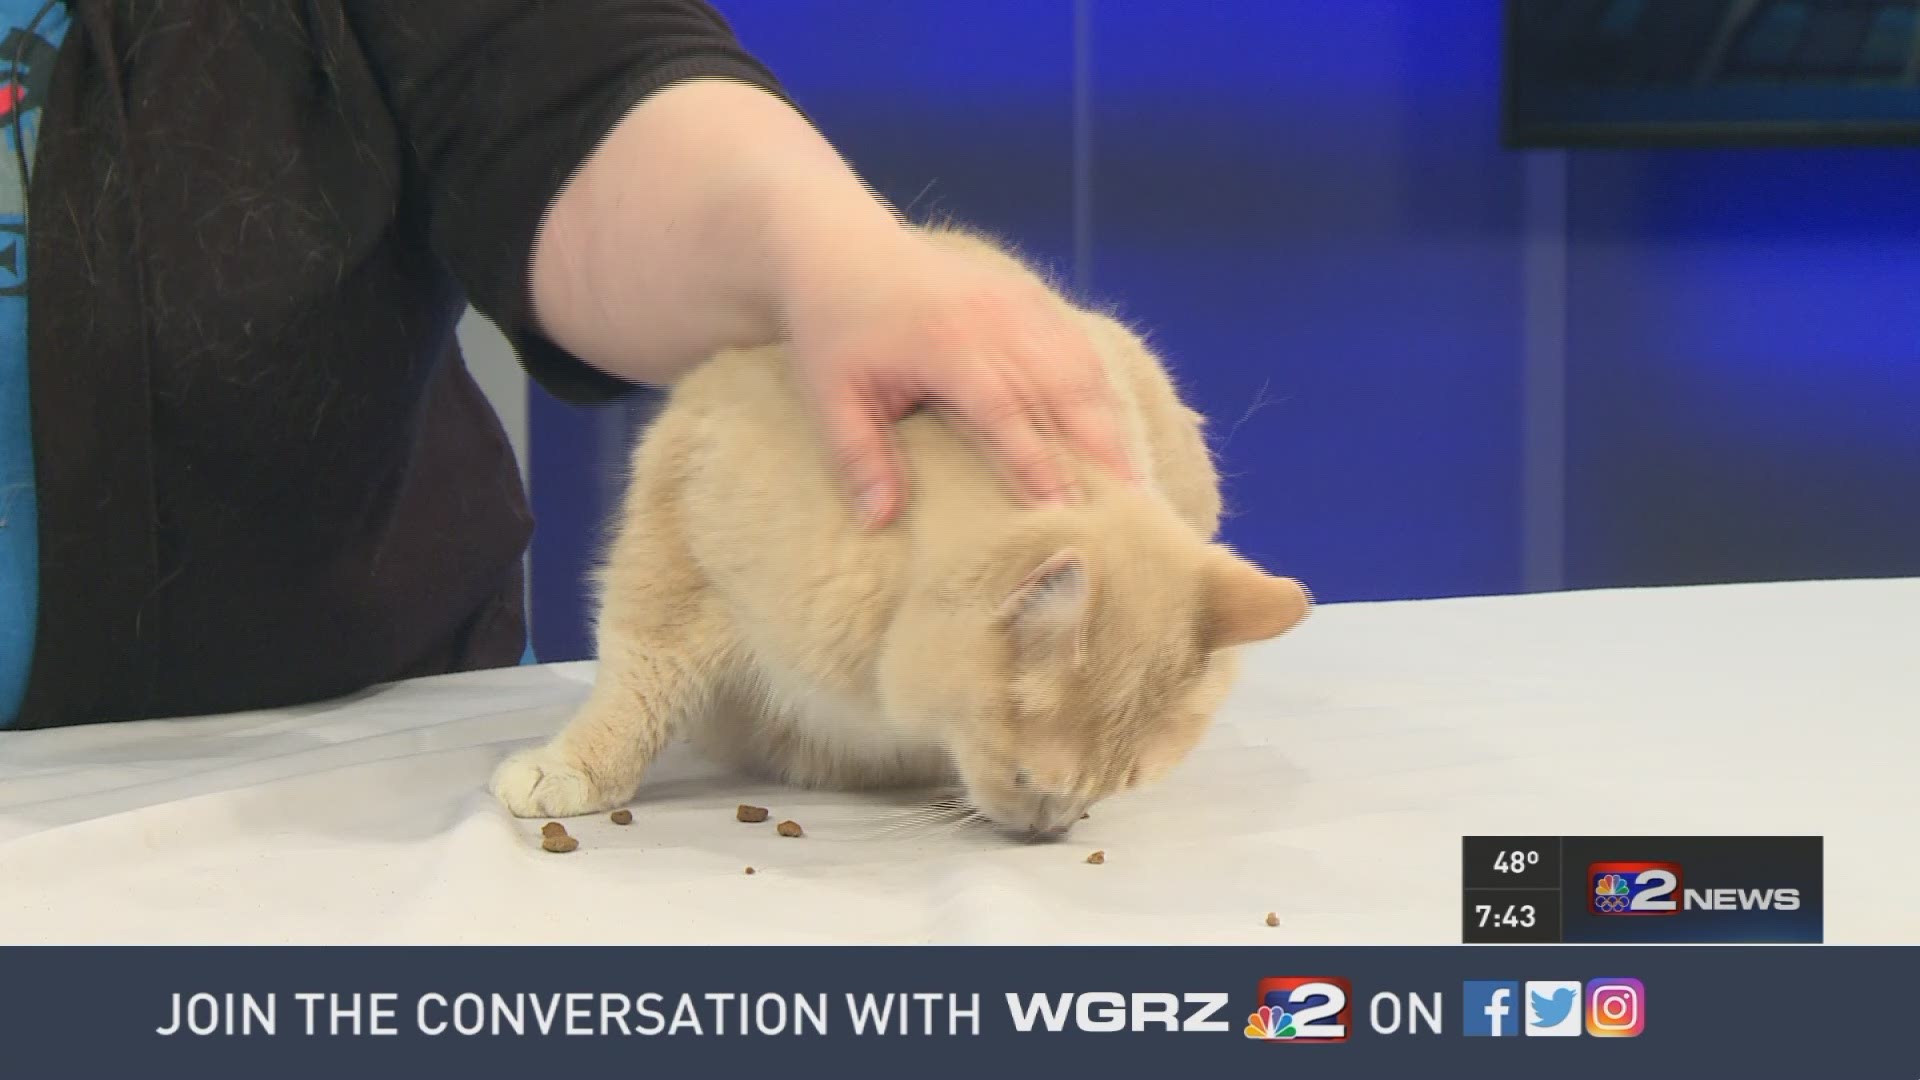 Chase the cat is an orange cat up for adoption from Buffalo CARES.